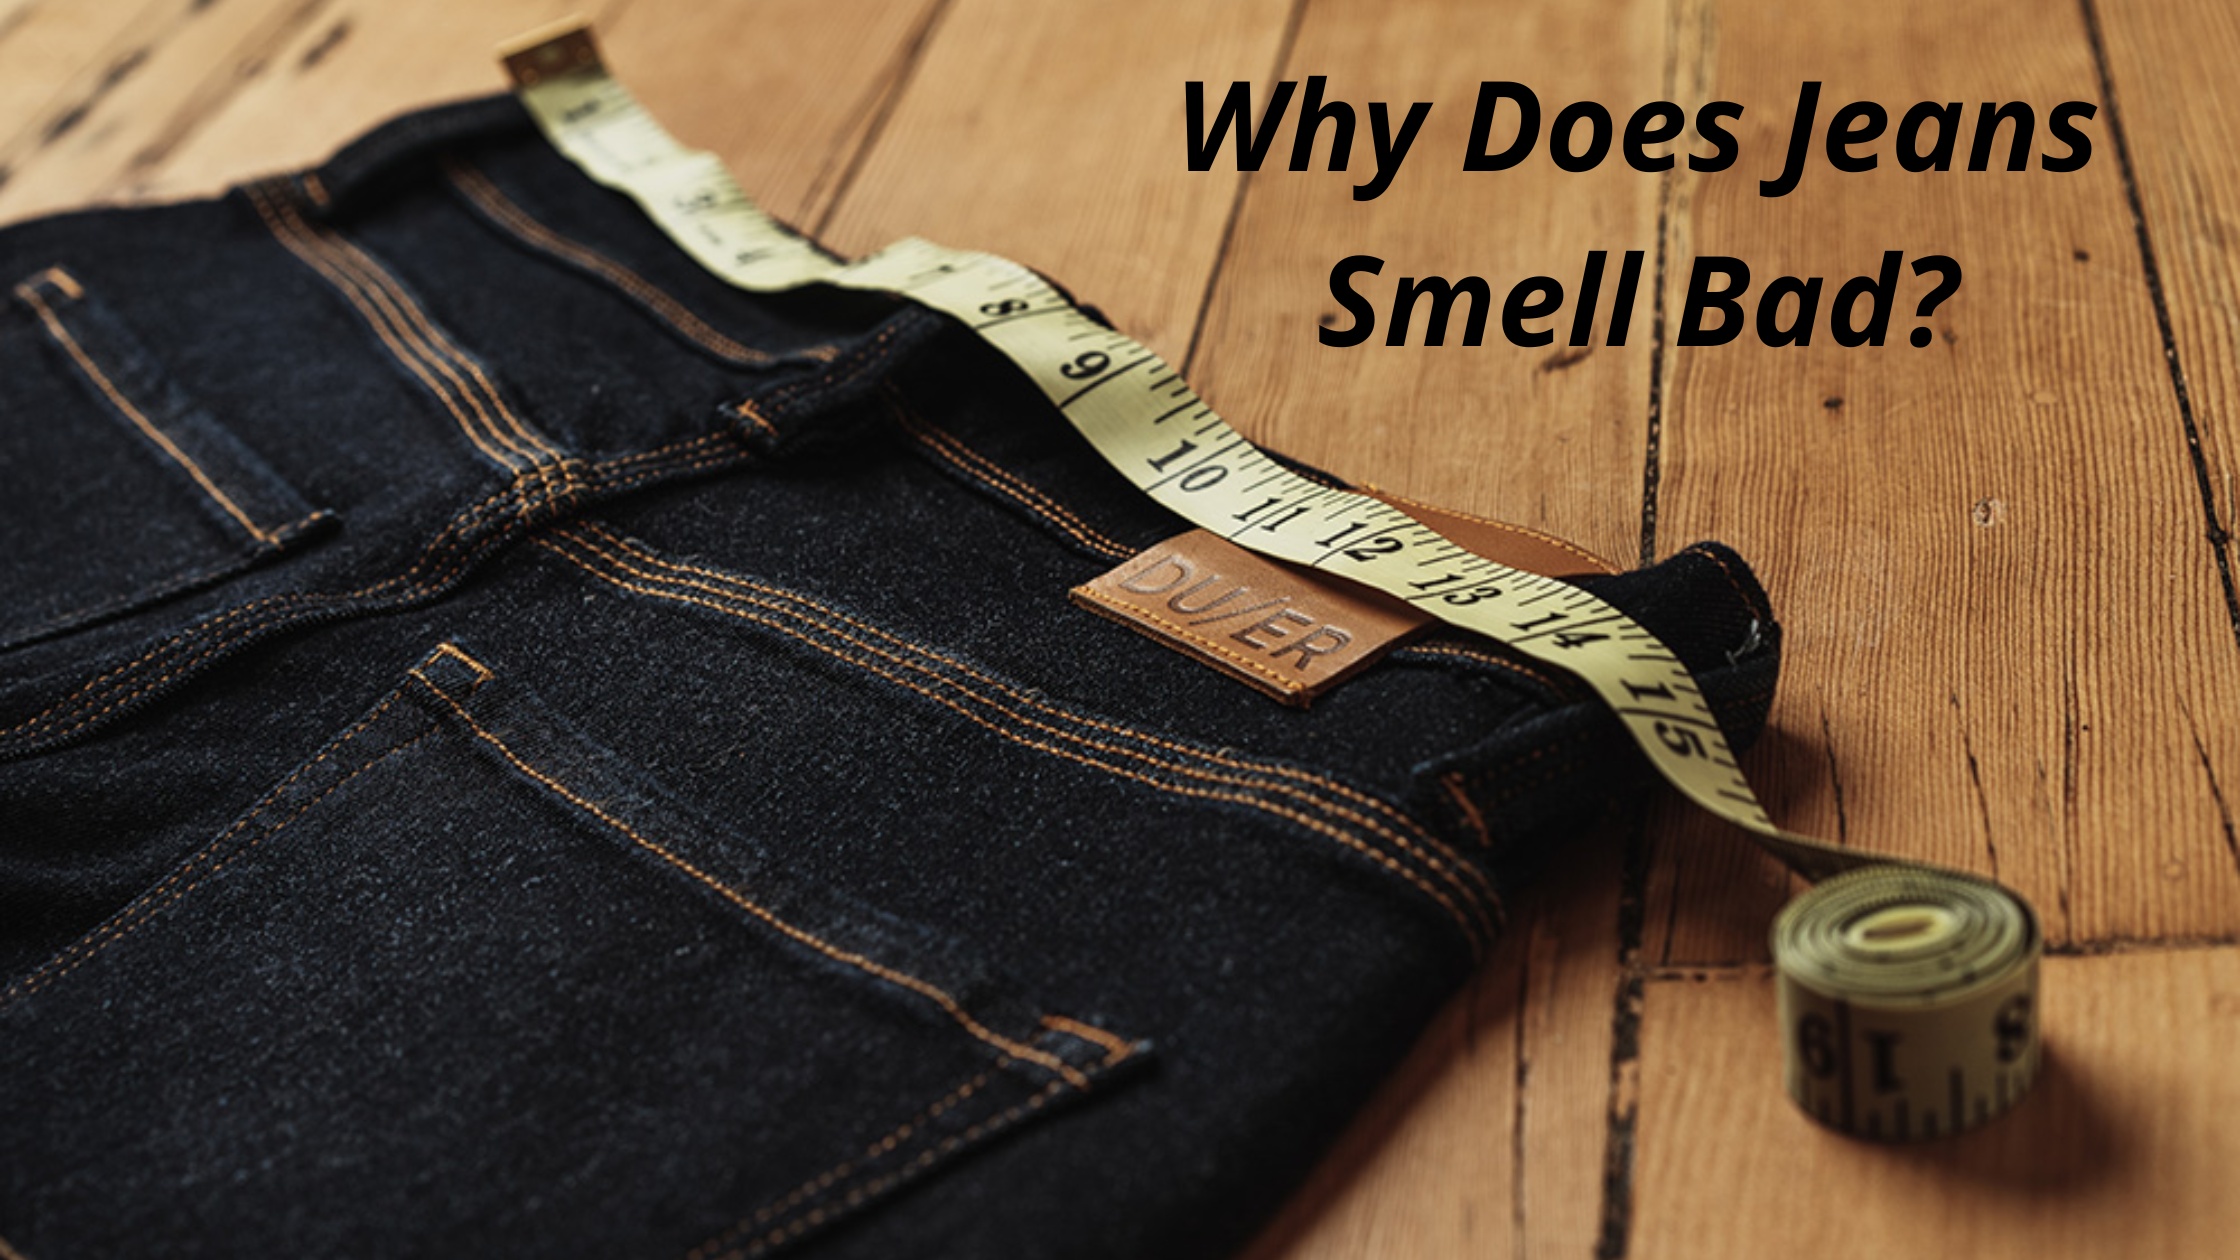 Why Does Jeans Smell Bad?